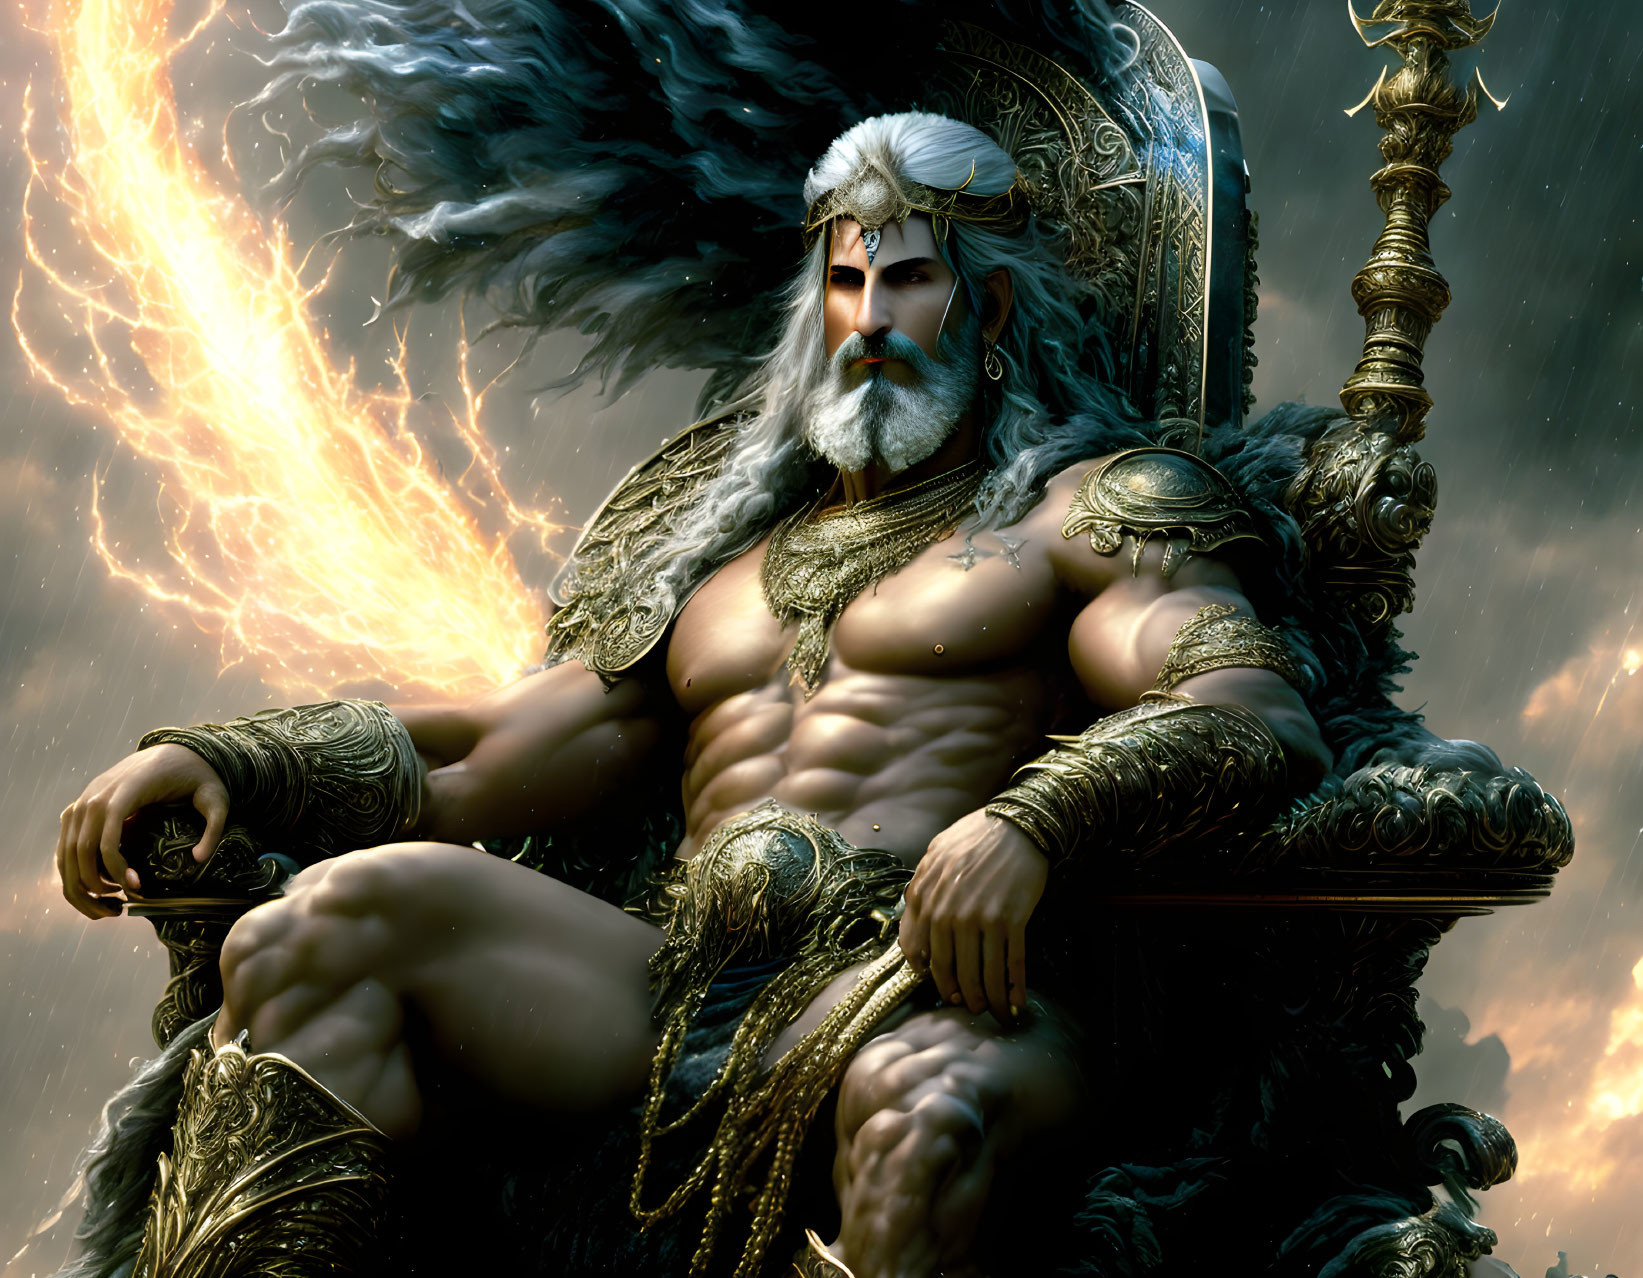 Muscular man on ornate throne surrounded by dramatic clouds and lightning